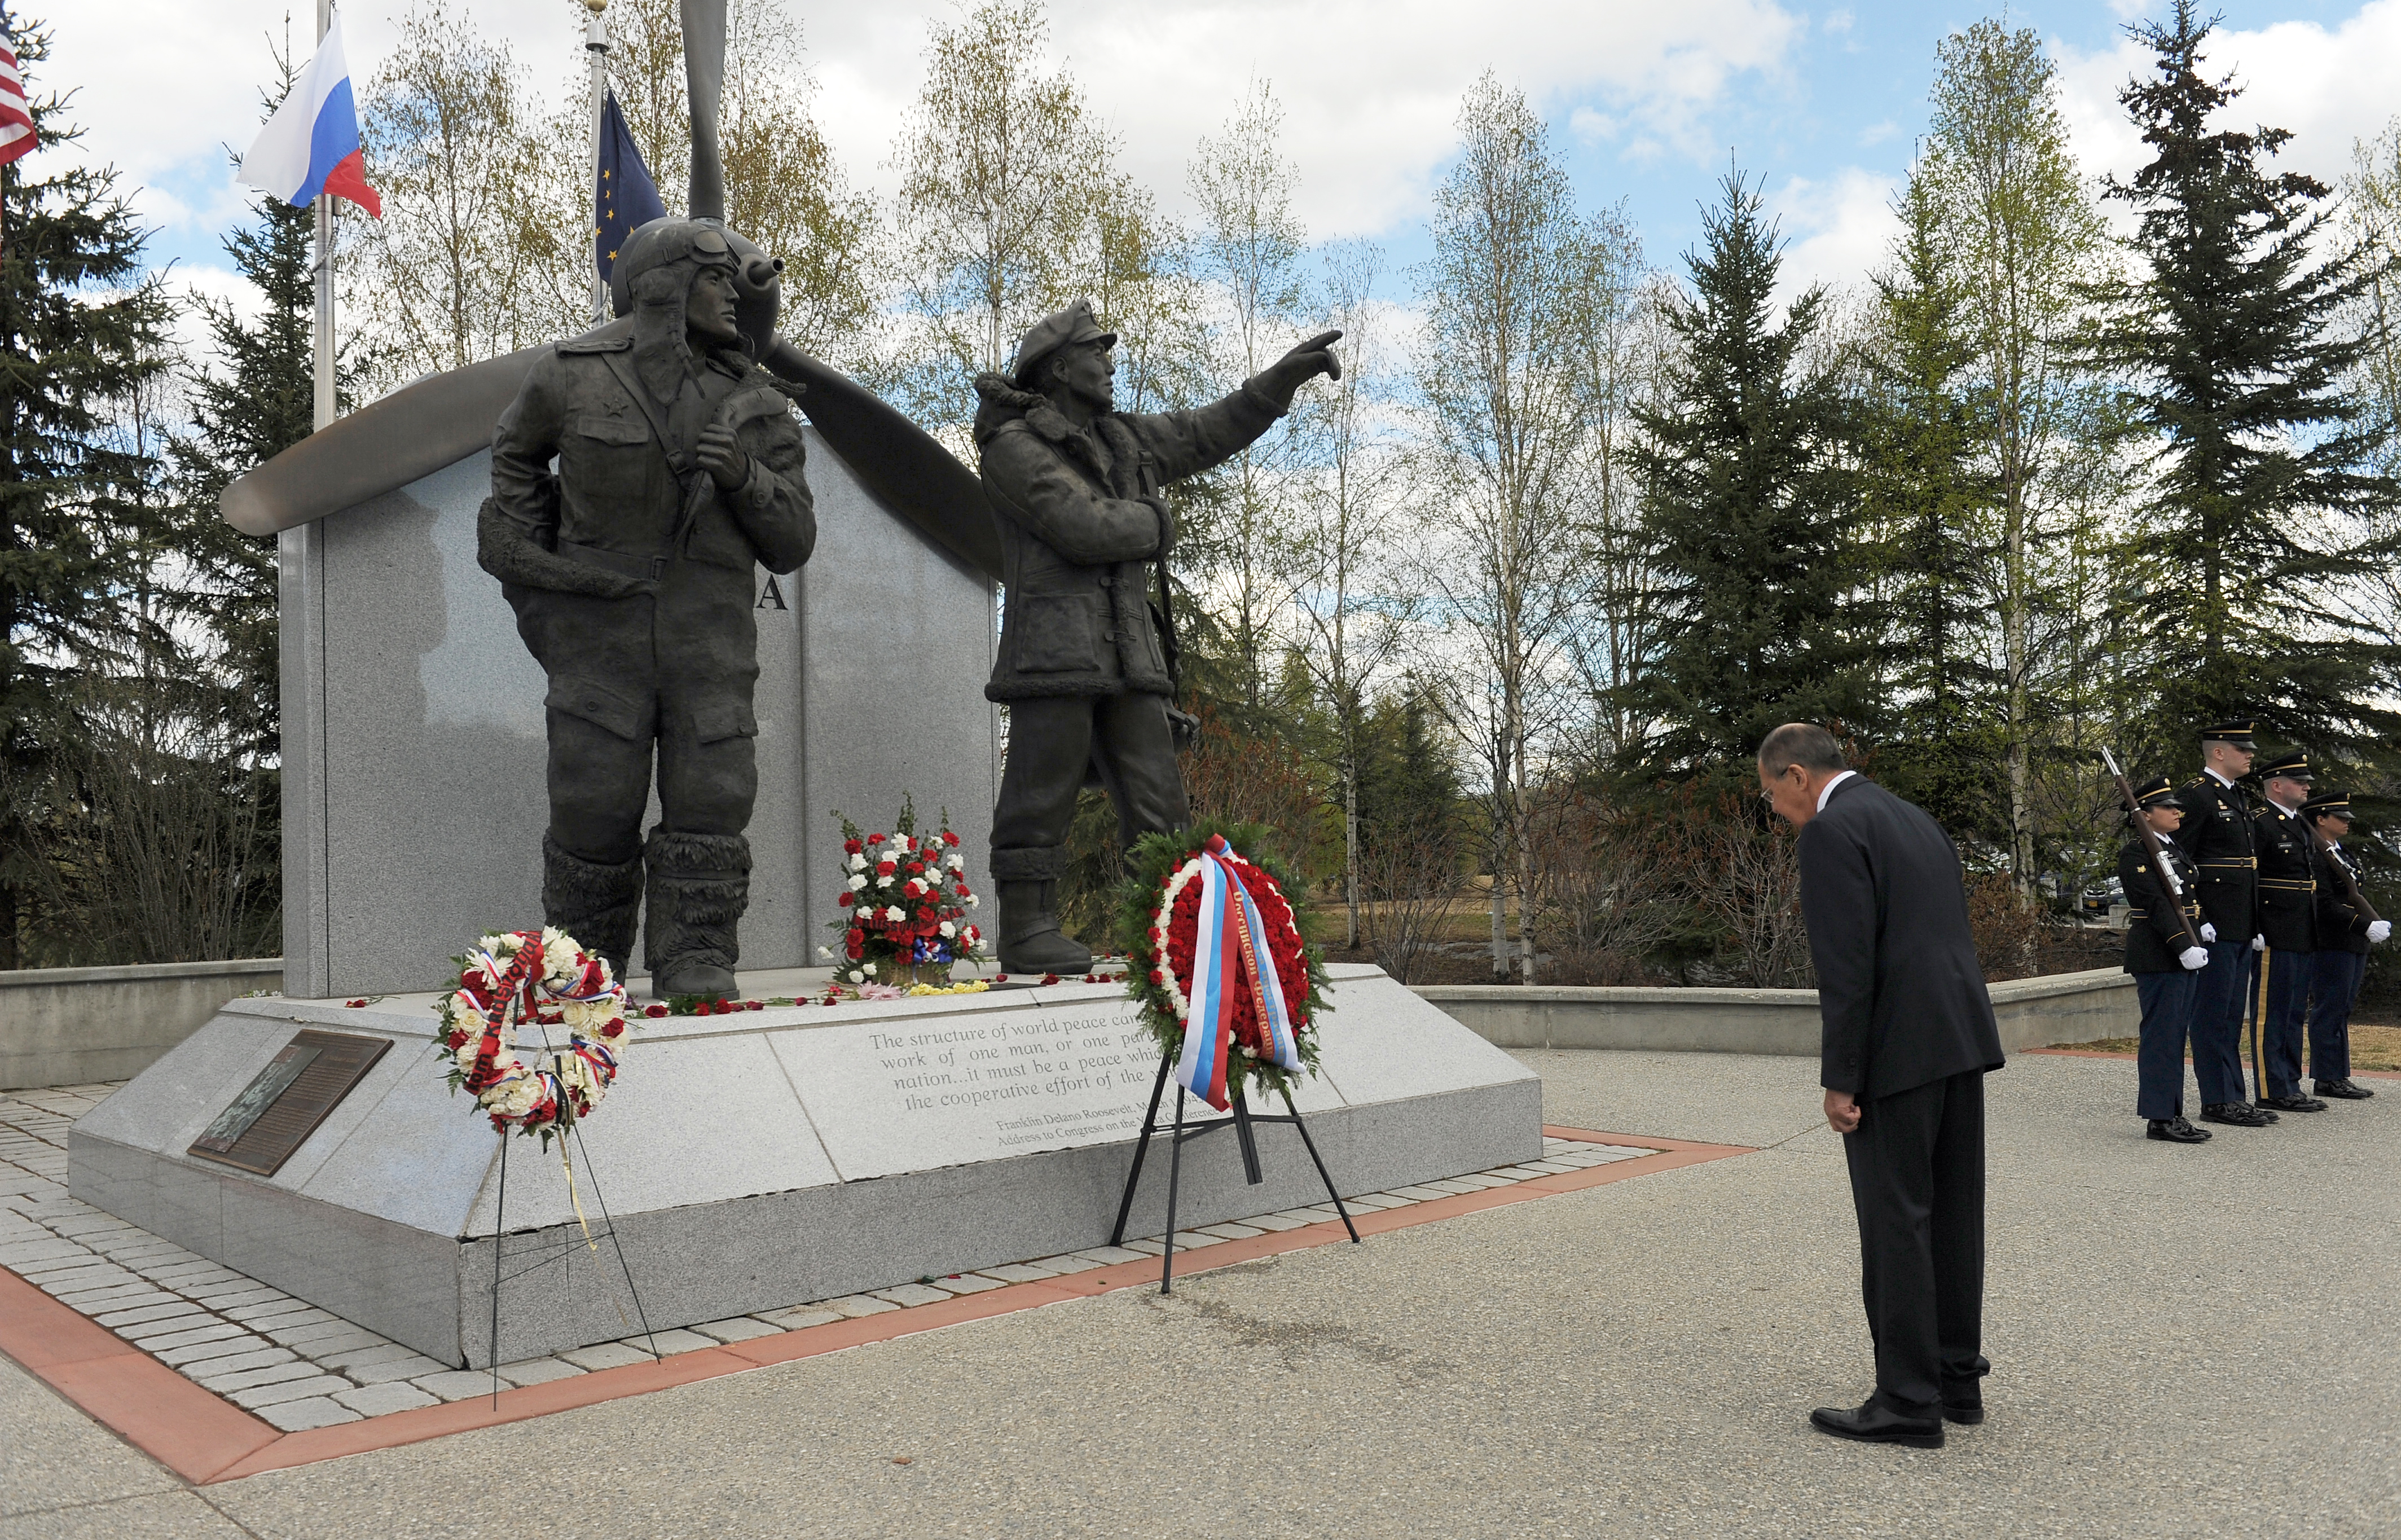 Minister of Foreign Affairs of the Russian Federation, Sergey Lavrov, bows his head during a wreath laying ceremony at the Alaska Siberia Lendlease Memorial in Fairbanks, Alaska, on Thursday, May 11, 2017. The memorial honors the U.S. and Soviet pilots who ferried planes from the U.S. to Siberia during World War II. At right stands the Alaska Army National Guard honor guard. (Bob Hallinen / Alaska Dispatch News)